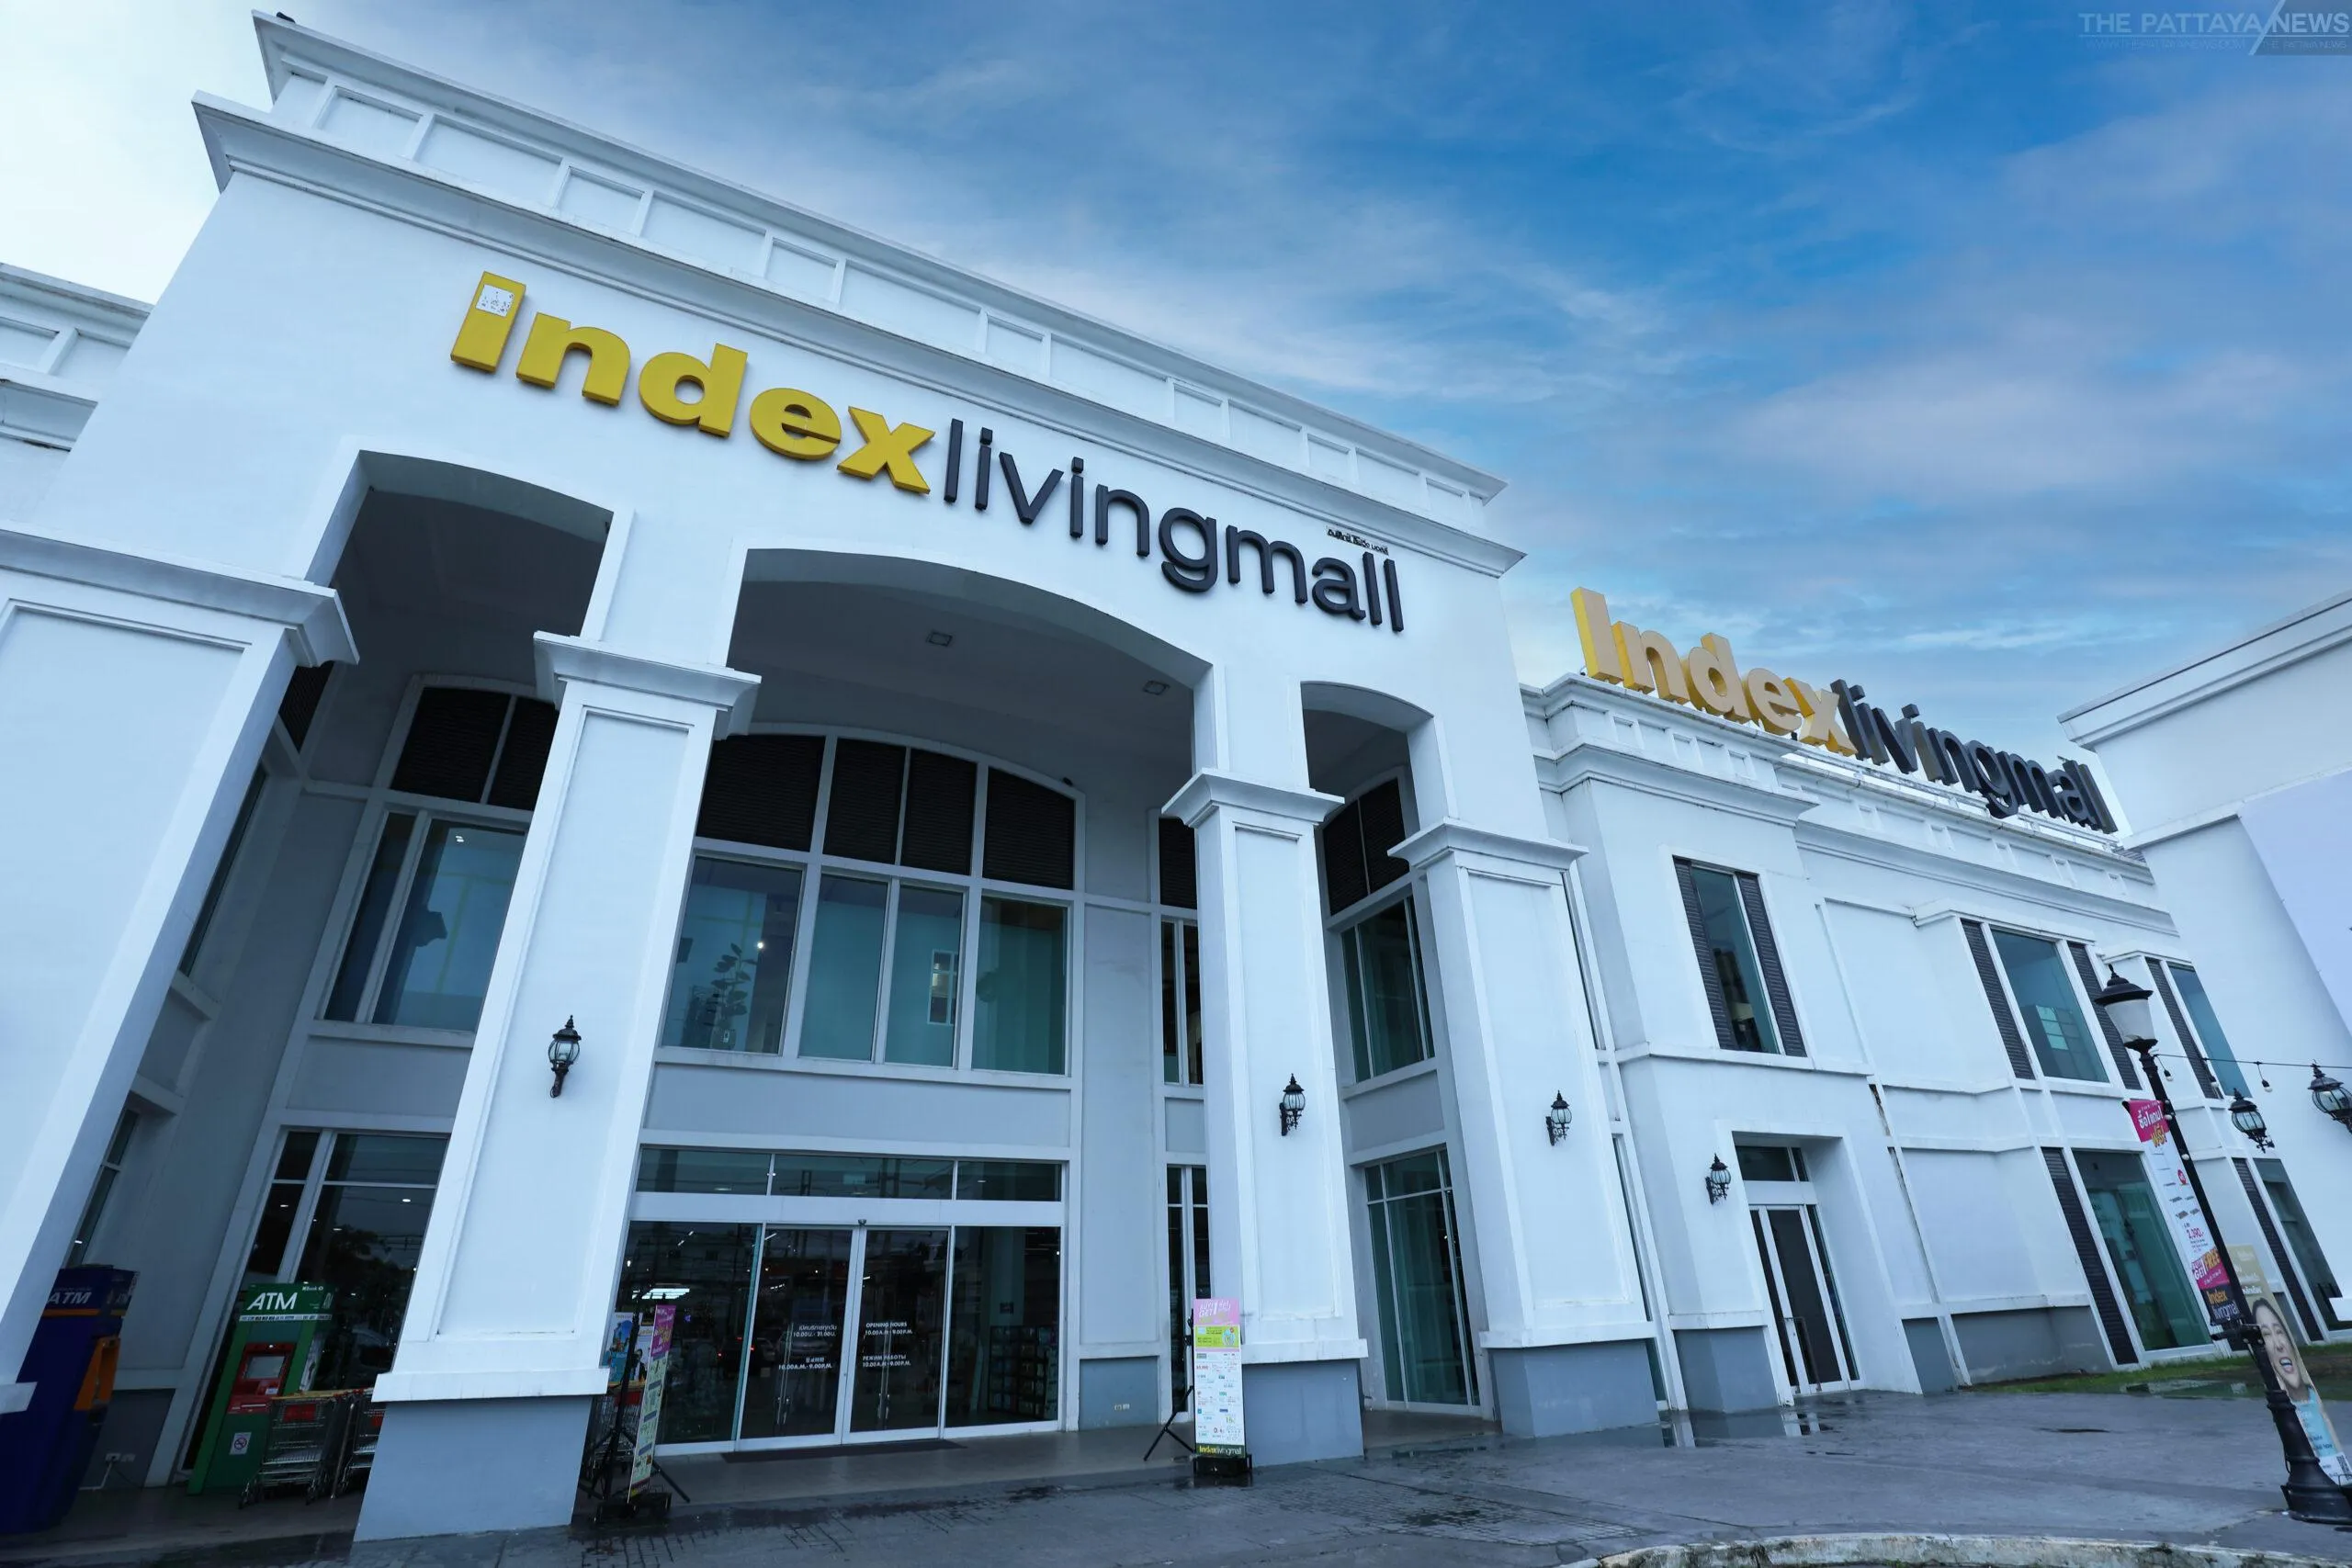 Index Living Mall in Thailand, central_asia | Home Decor - Rated 4.4